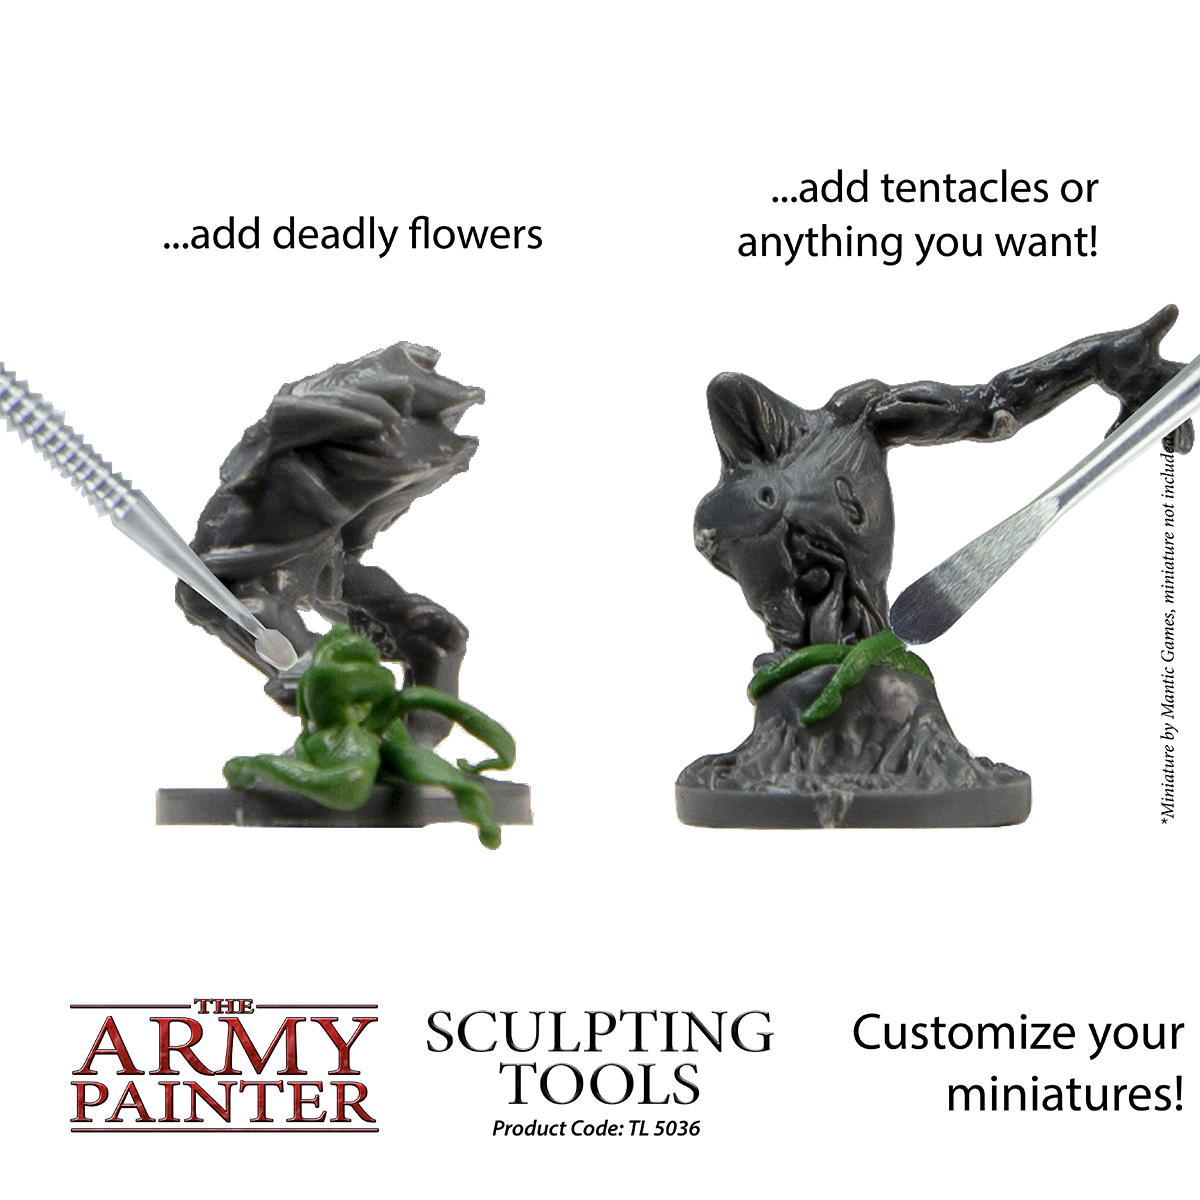 The Army Painter - Sculpting Tools